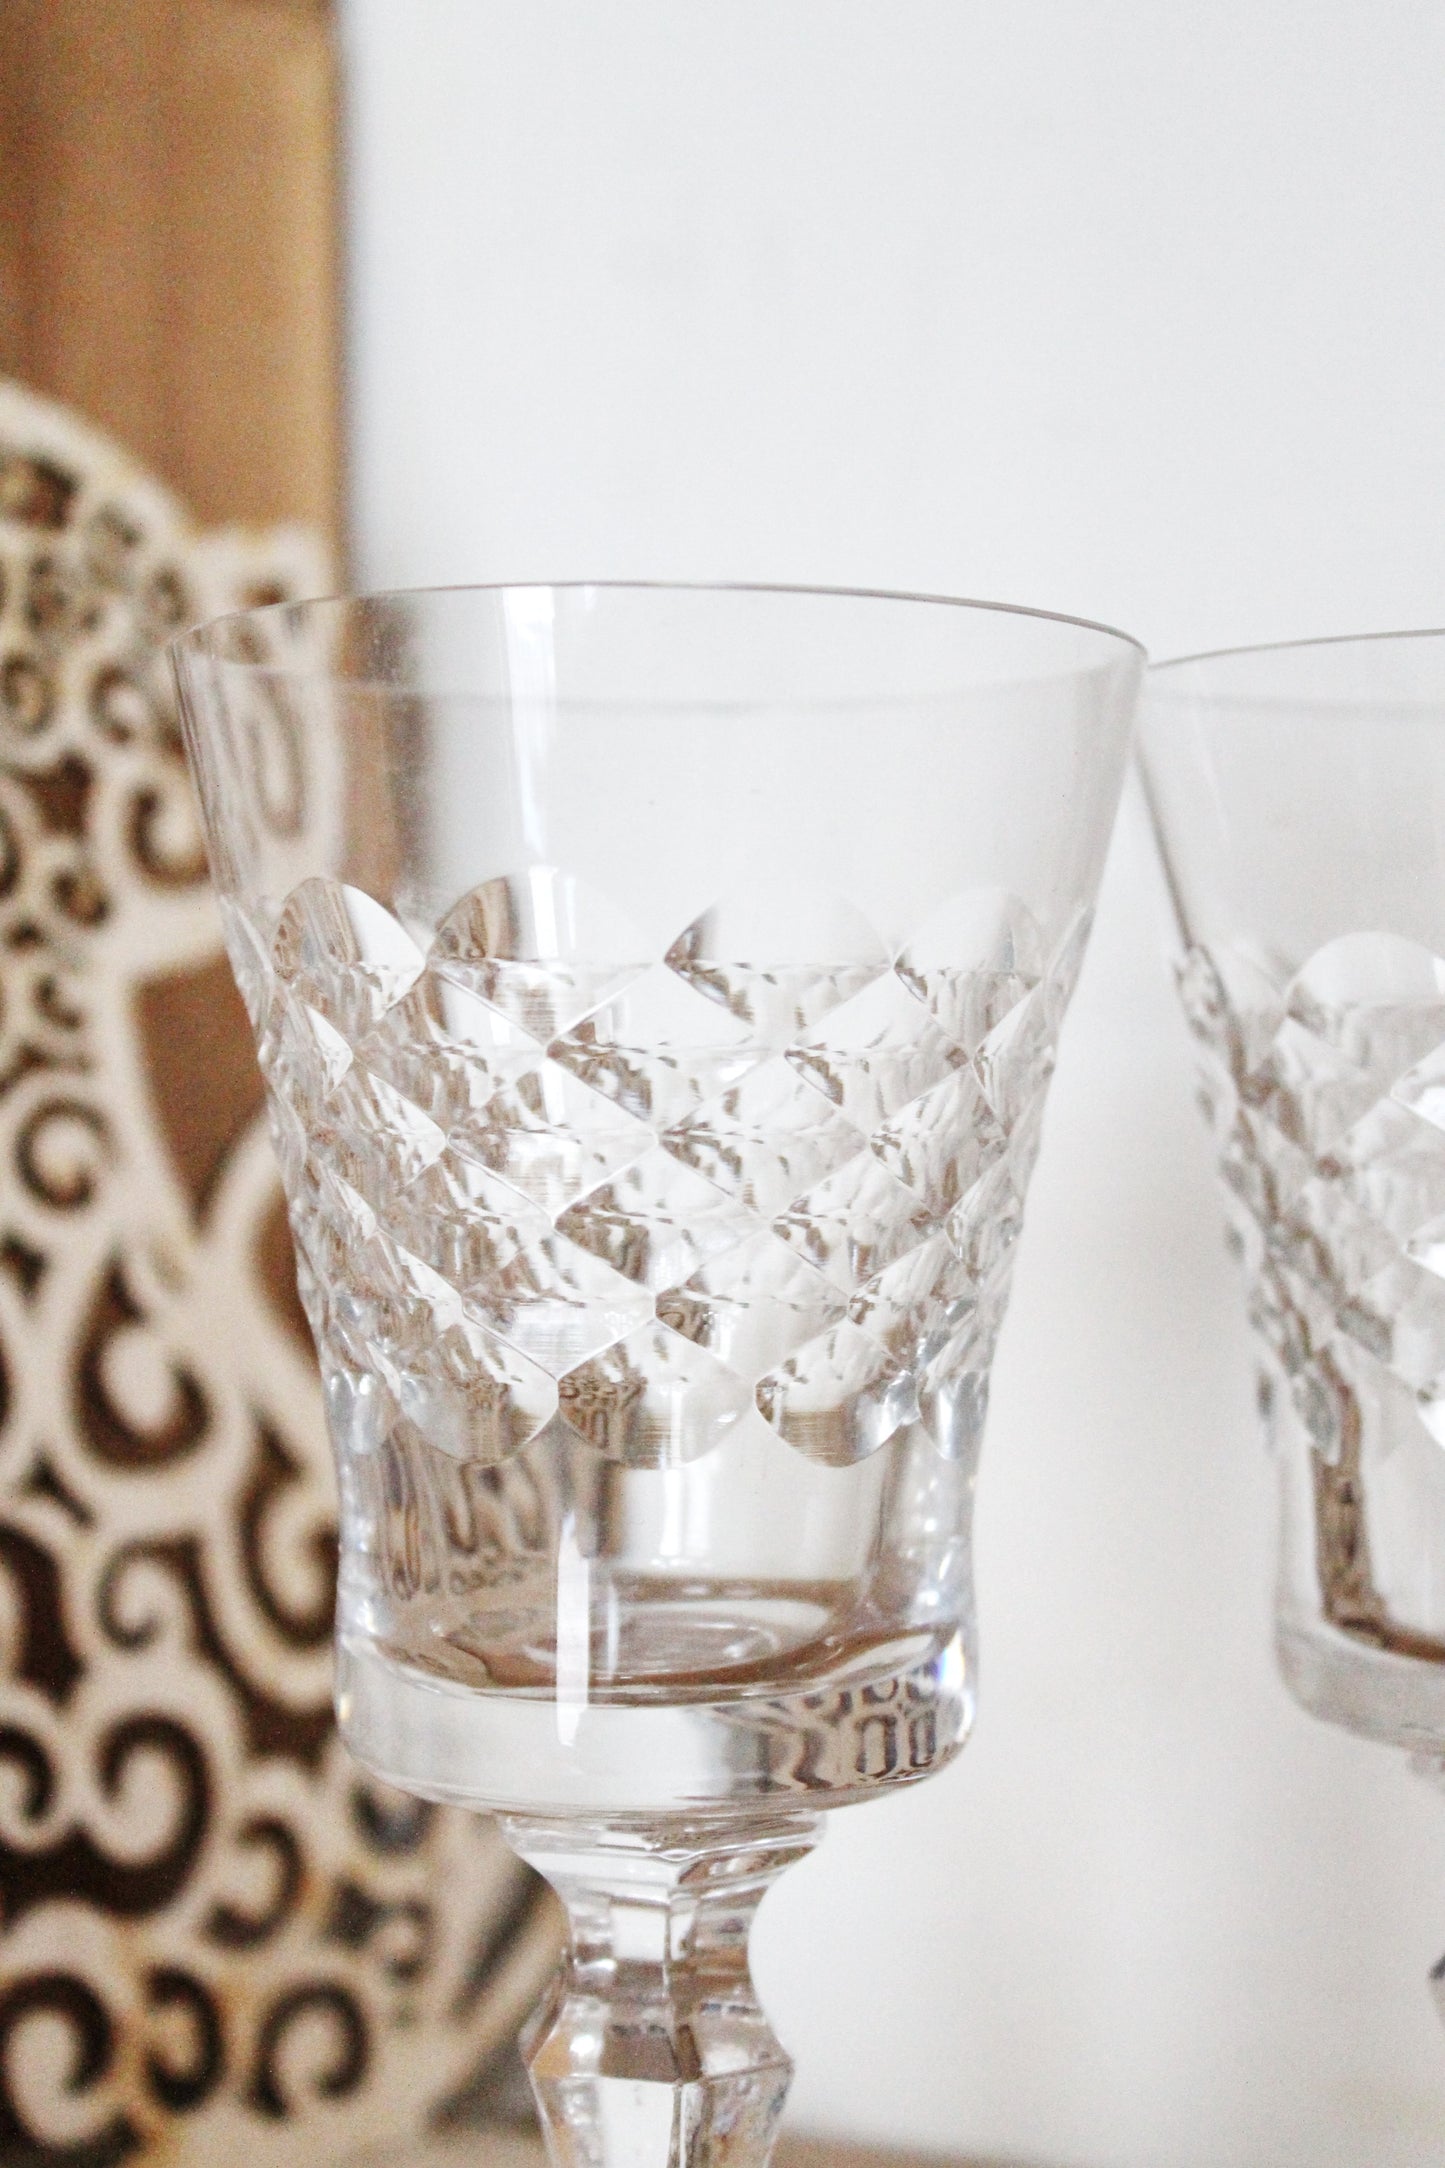 Set of two vintage crystal wineglasses - Germany beautiful vintage wineglasses - home decor glass - 1990s